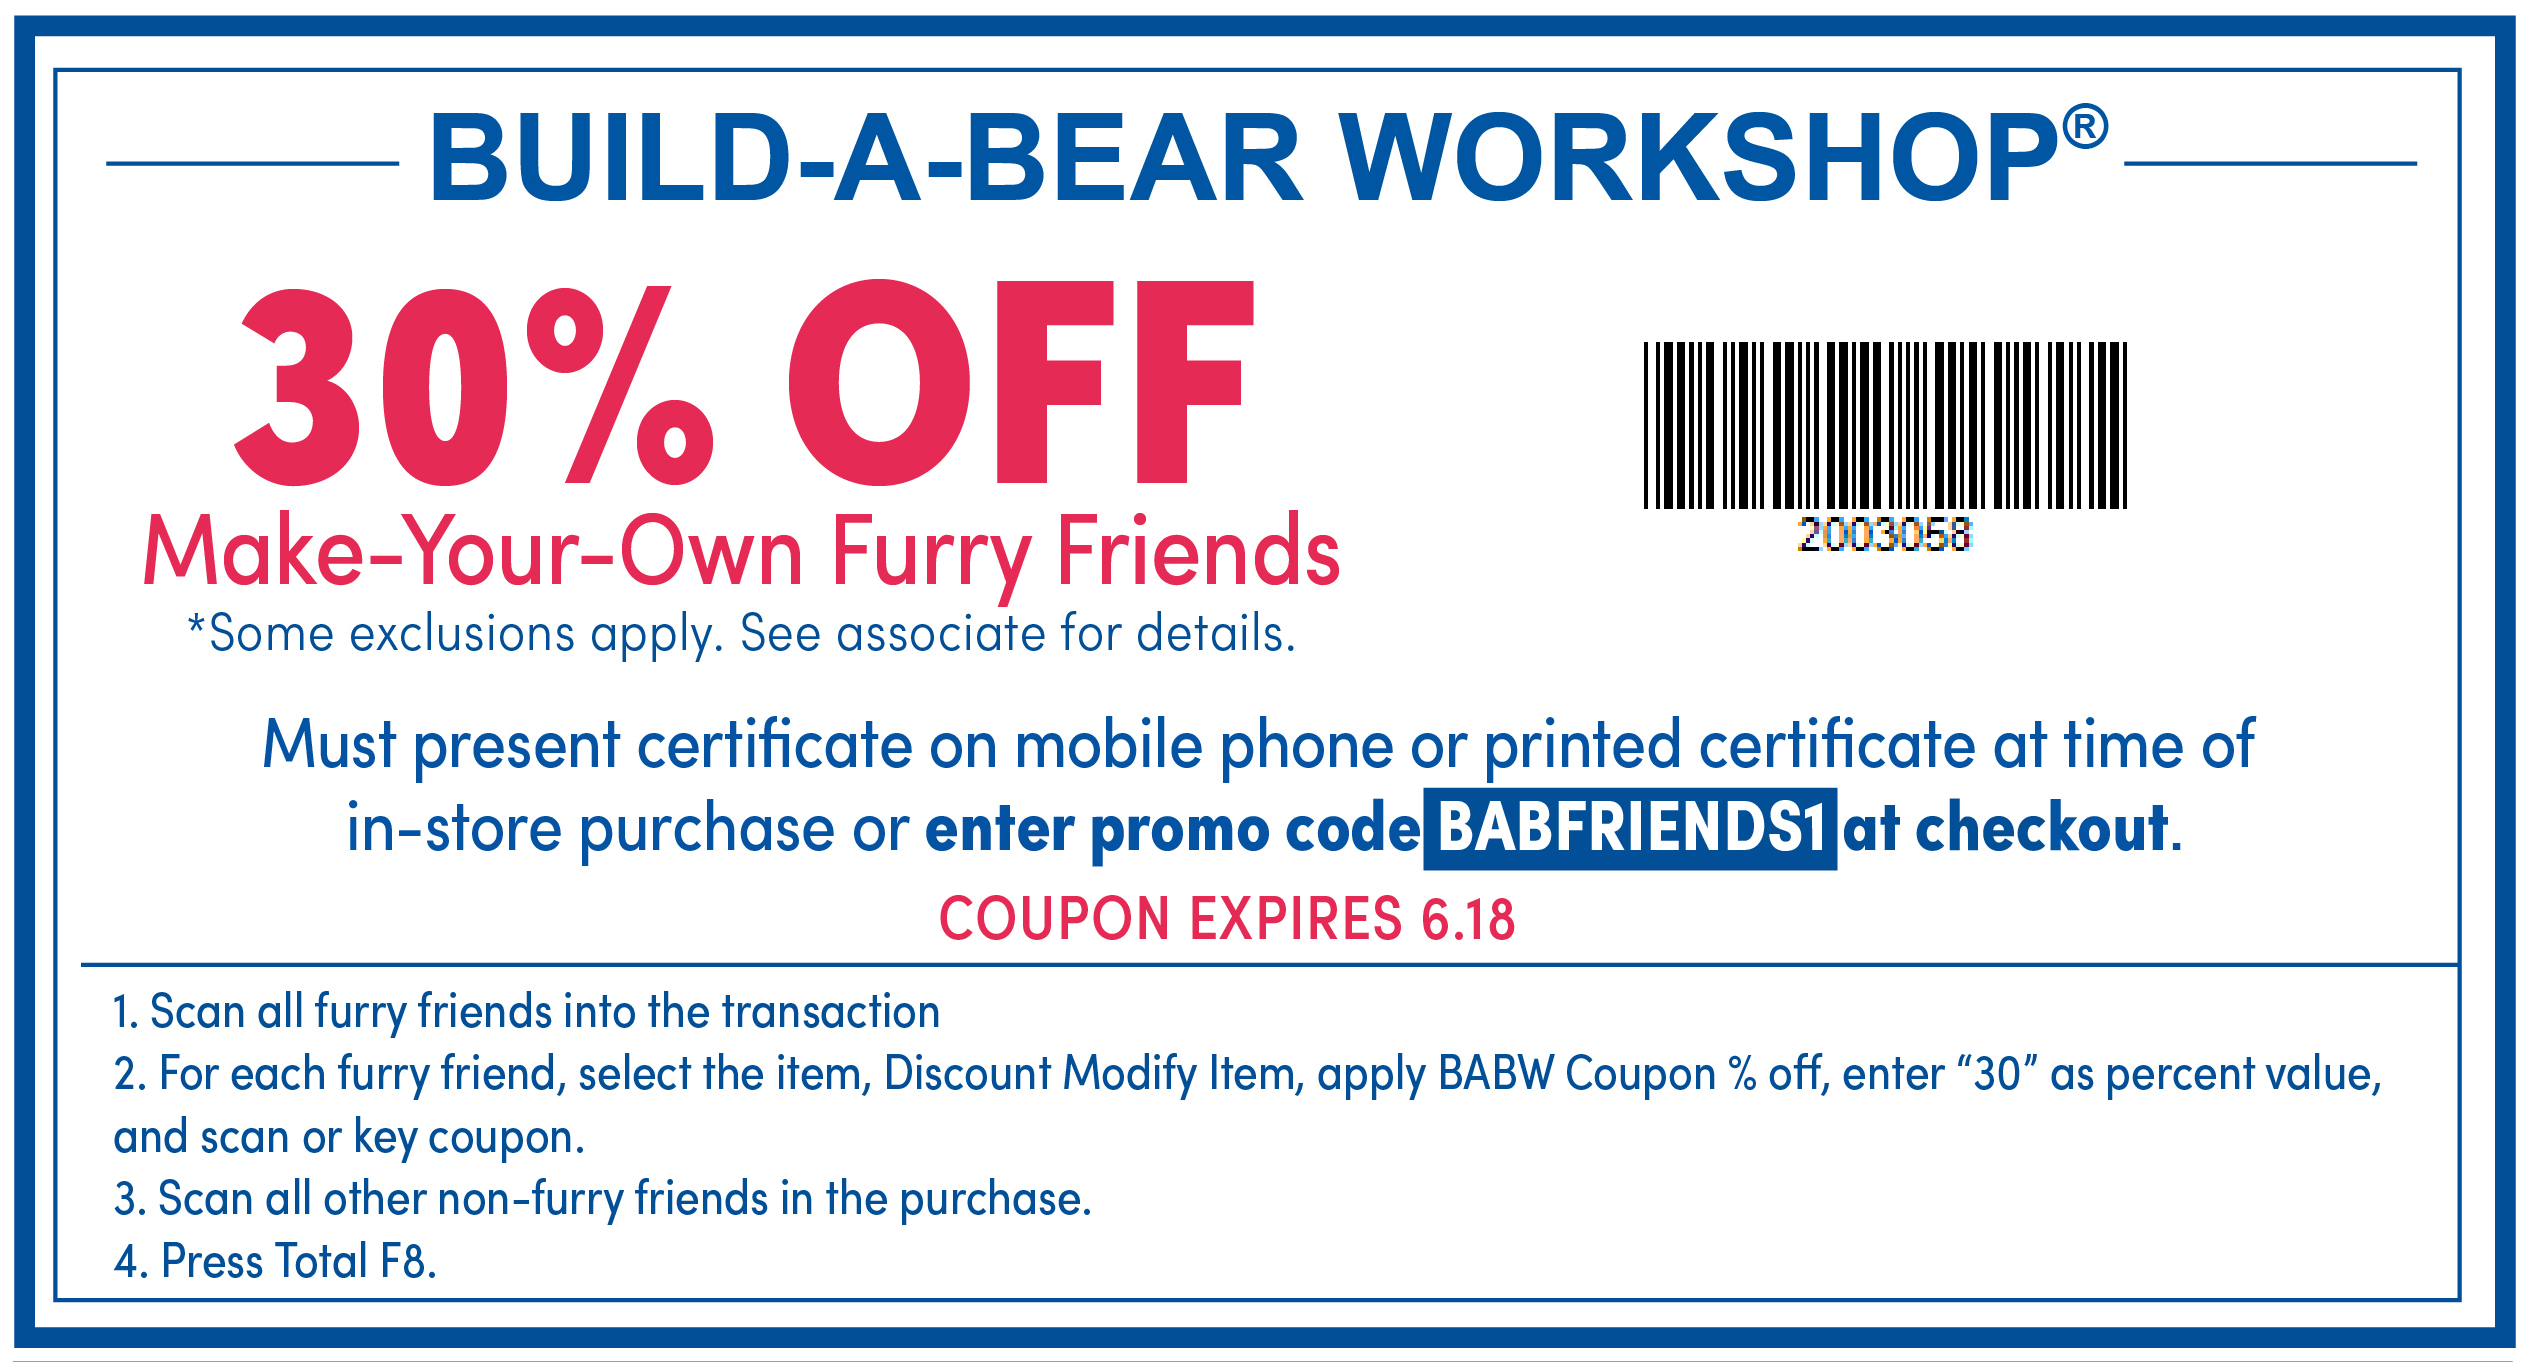 build-a-bear-friends-and-family-save-30-off-june-15-18